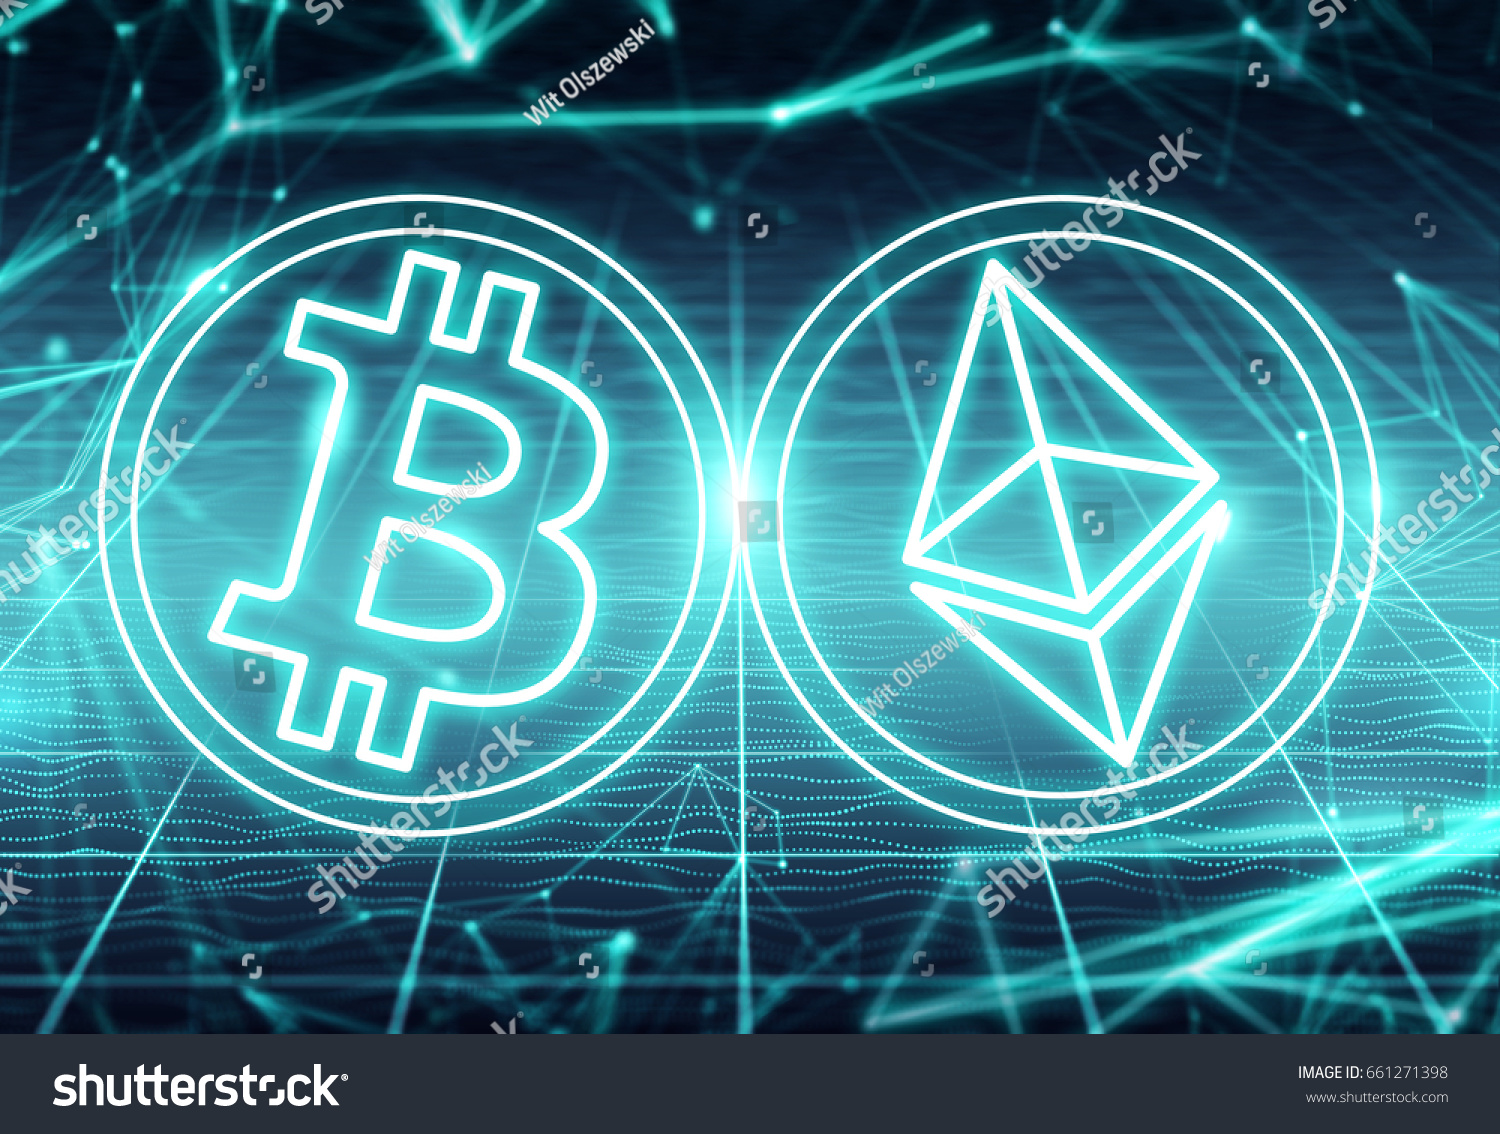 stock-photo-clash-of-bitcoin-and-ethereum-symbols-on-abstract-blue-background-competing-cryptocurrencies-661271398.jpg